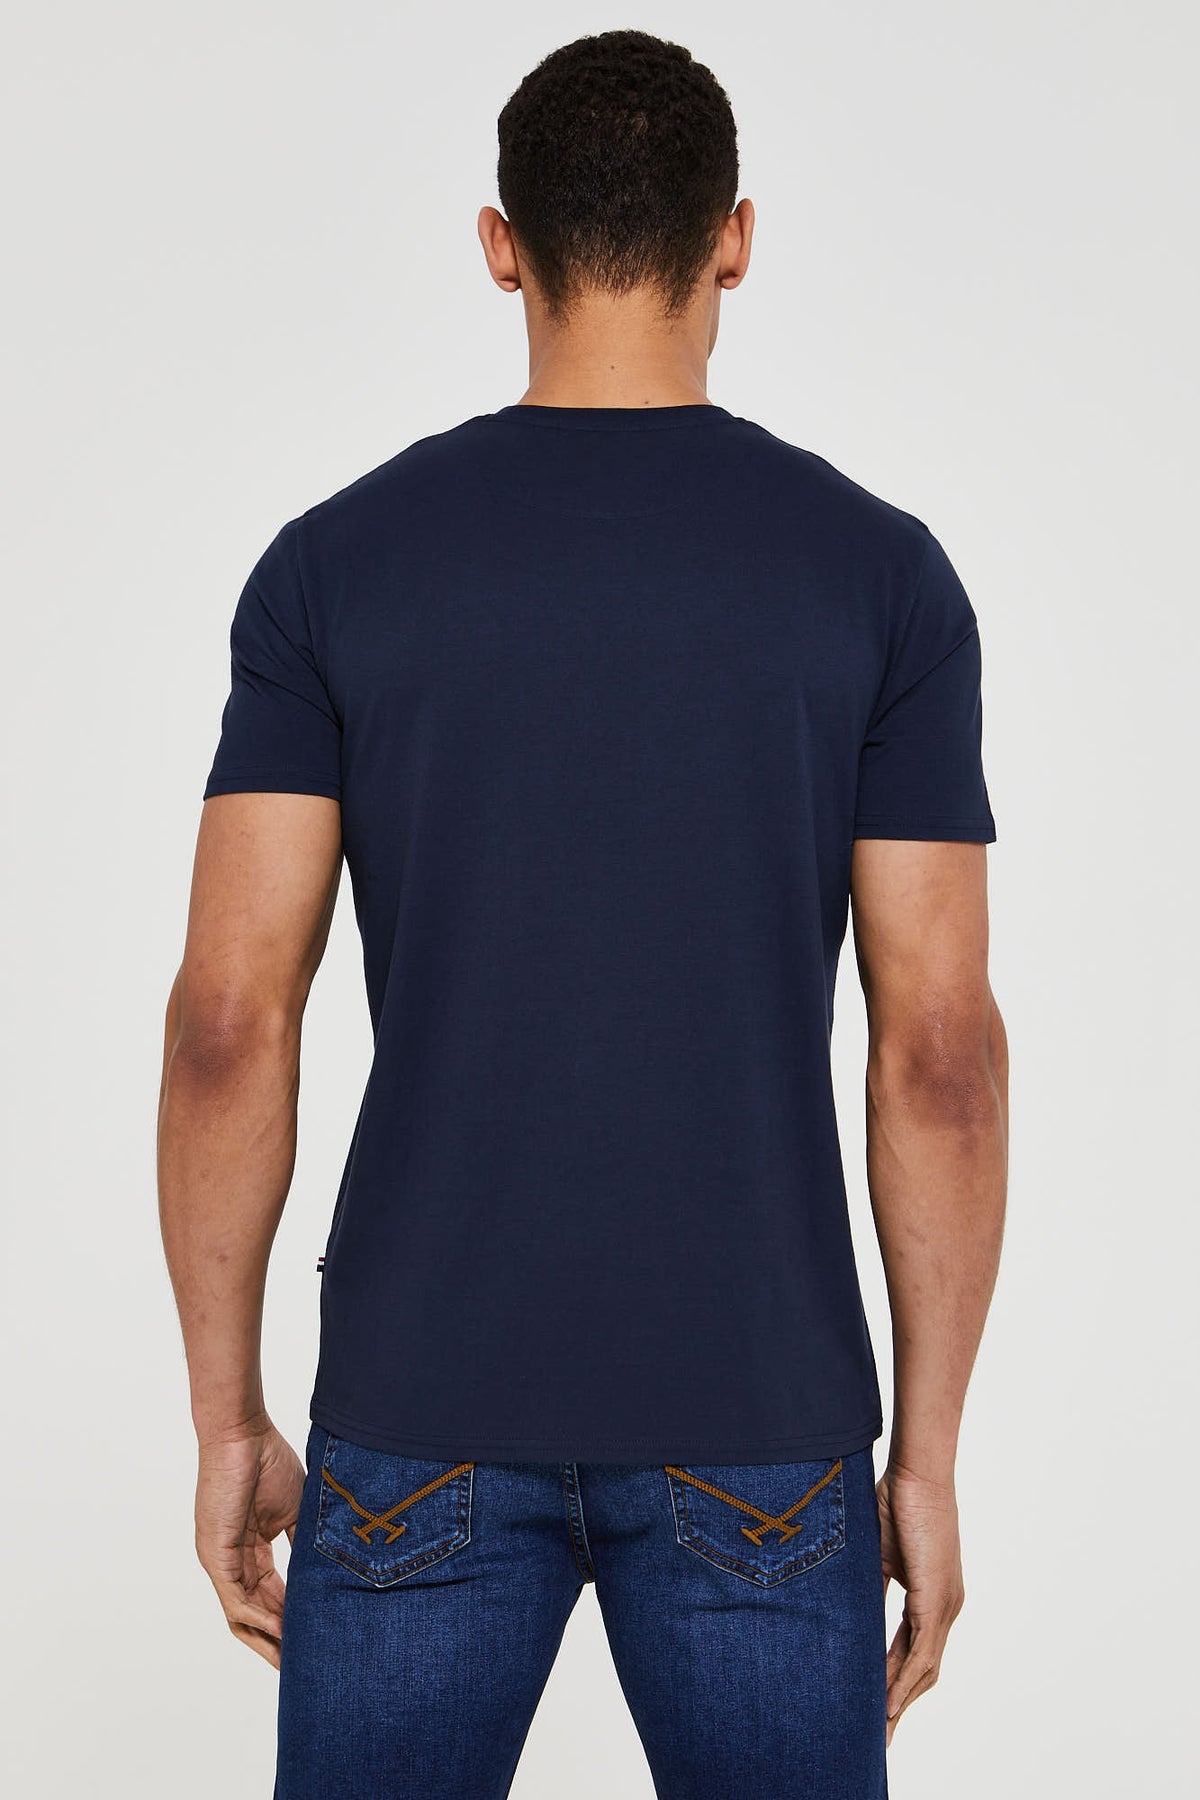 Mens Stacked Heritage T-Shirt in Navy Blue